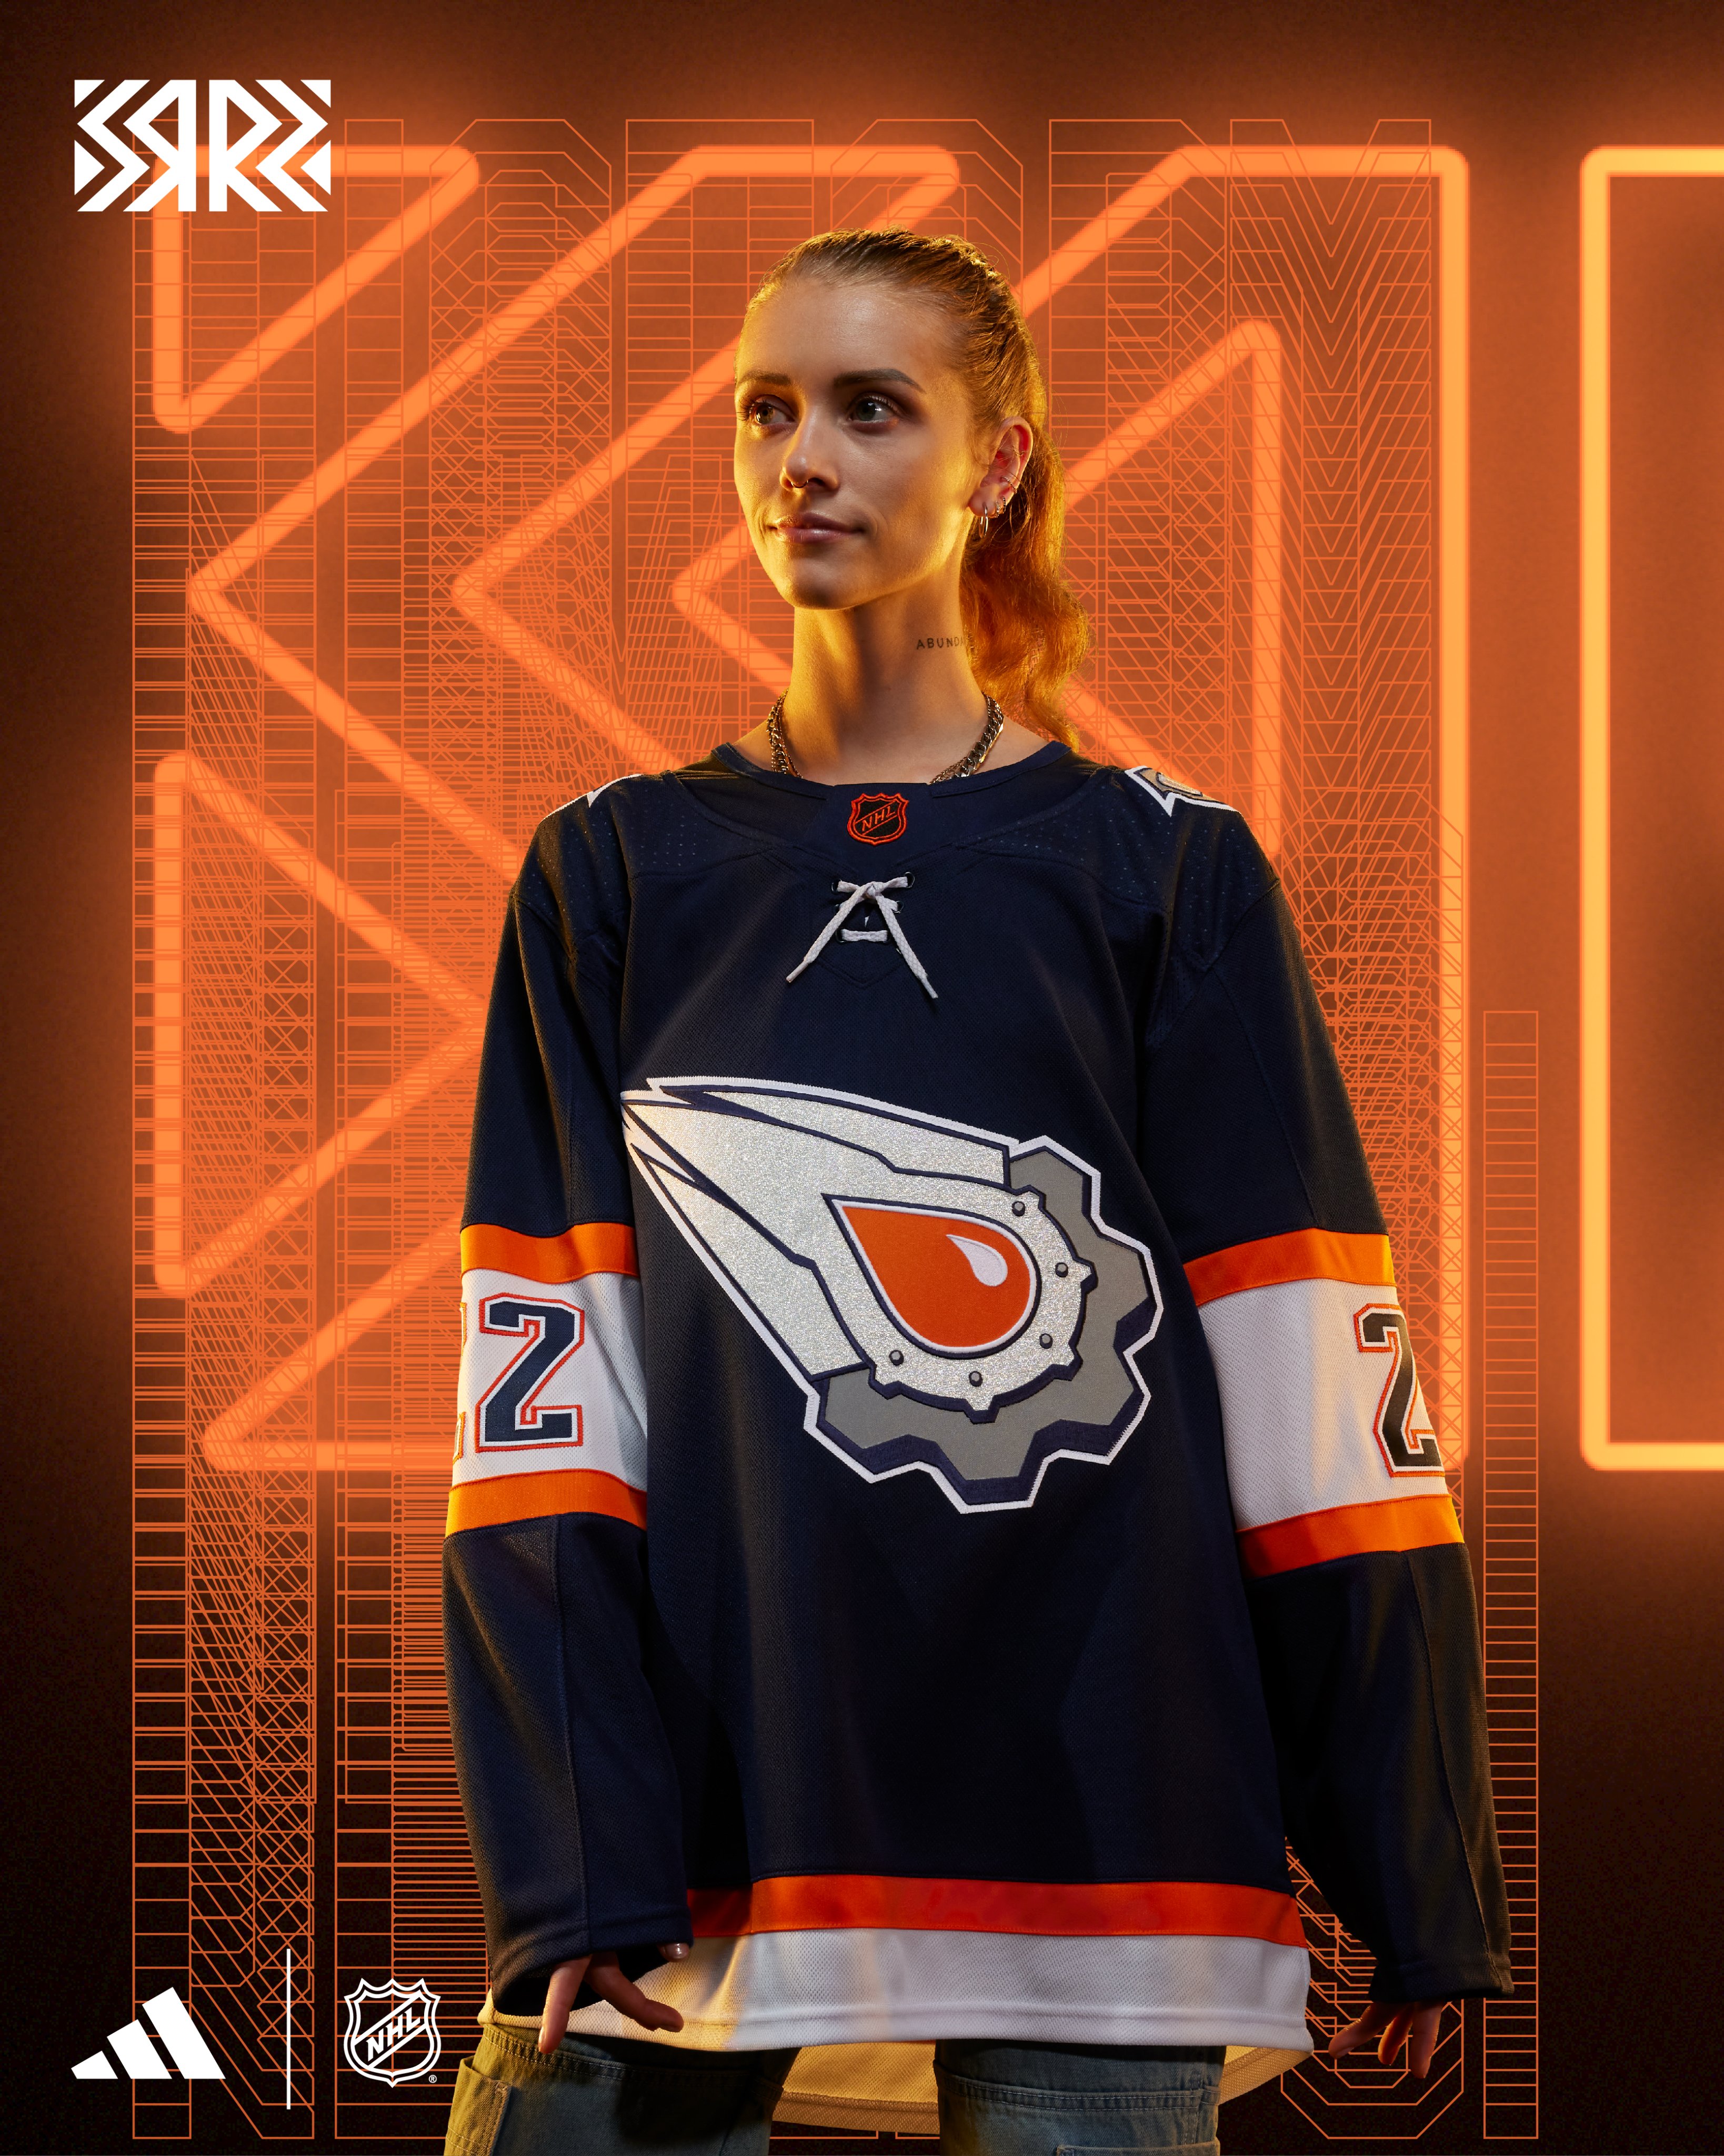 Here's a sneak peek at the Edmonton Oilers' new throwback jersey